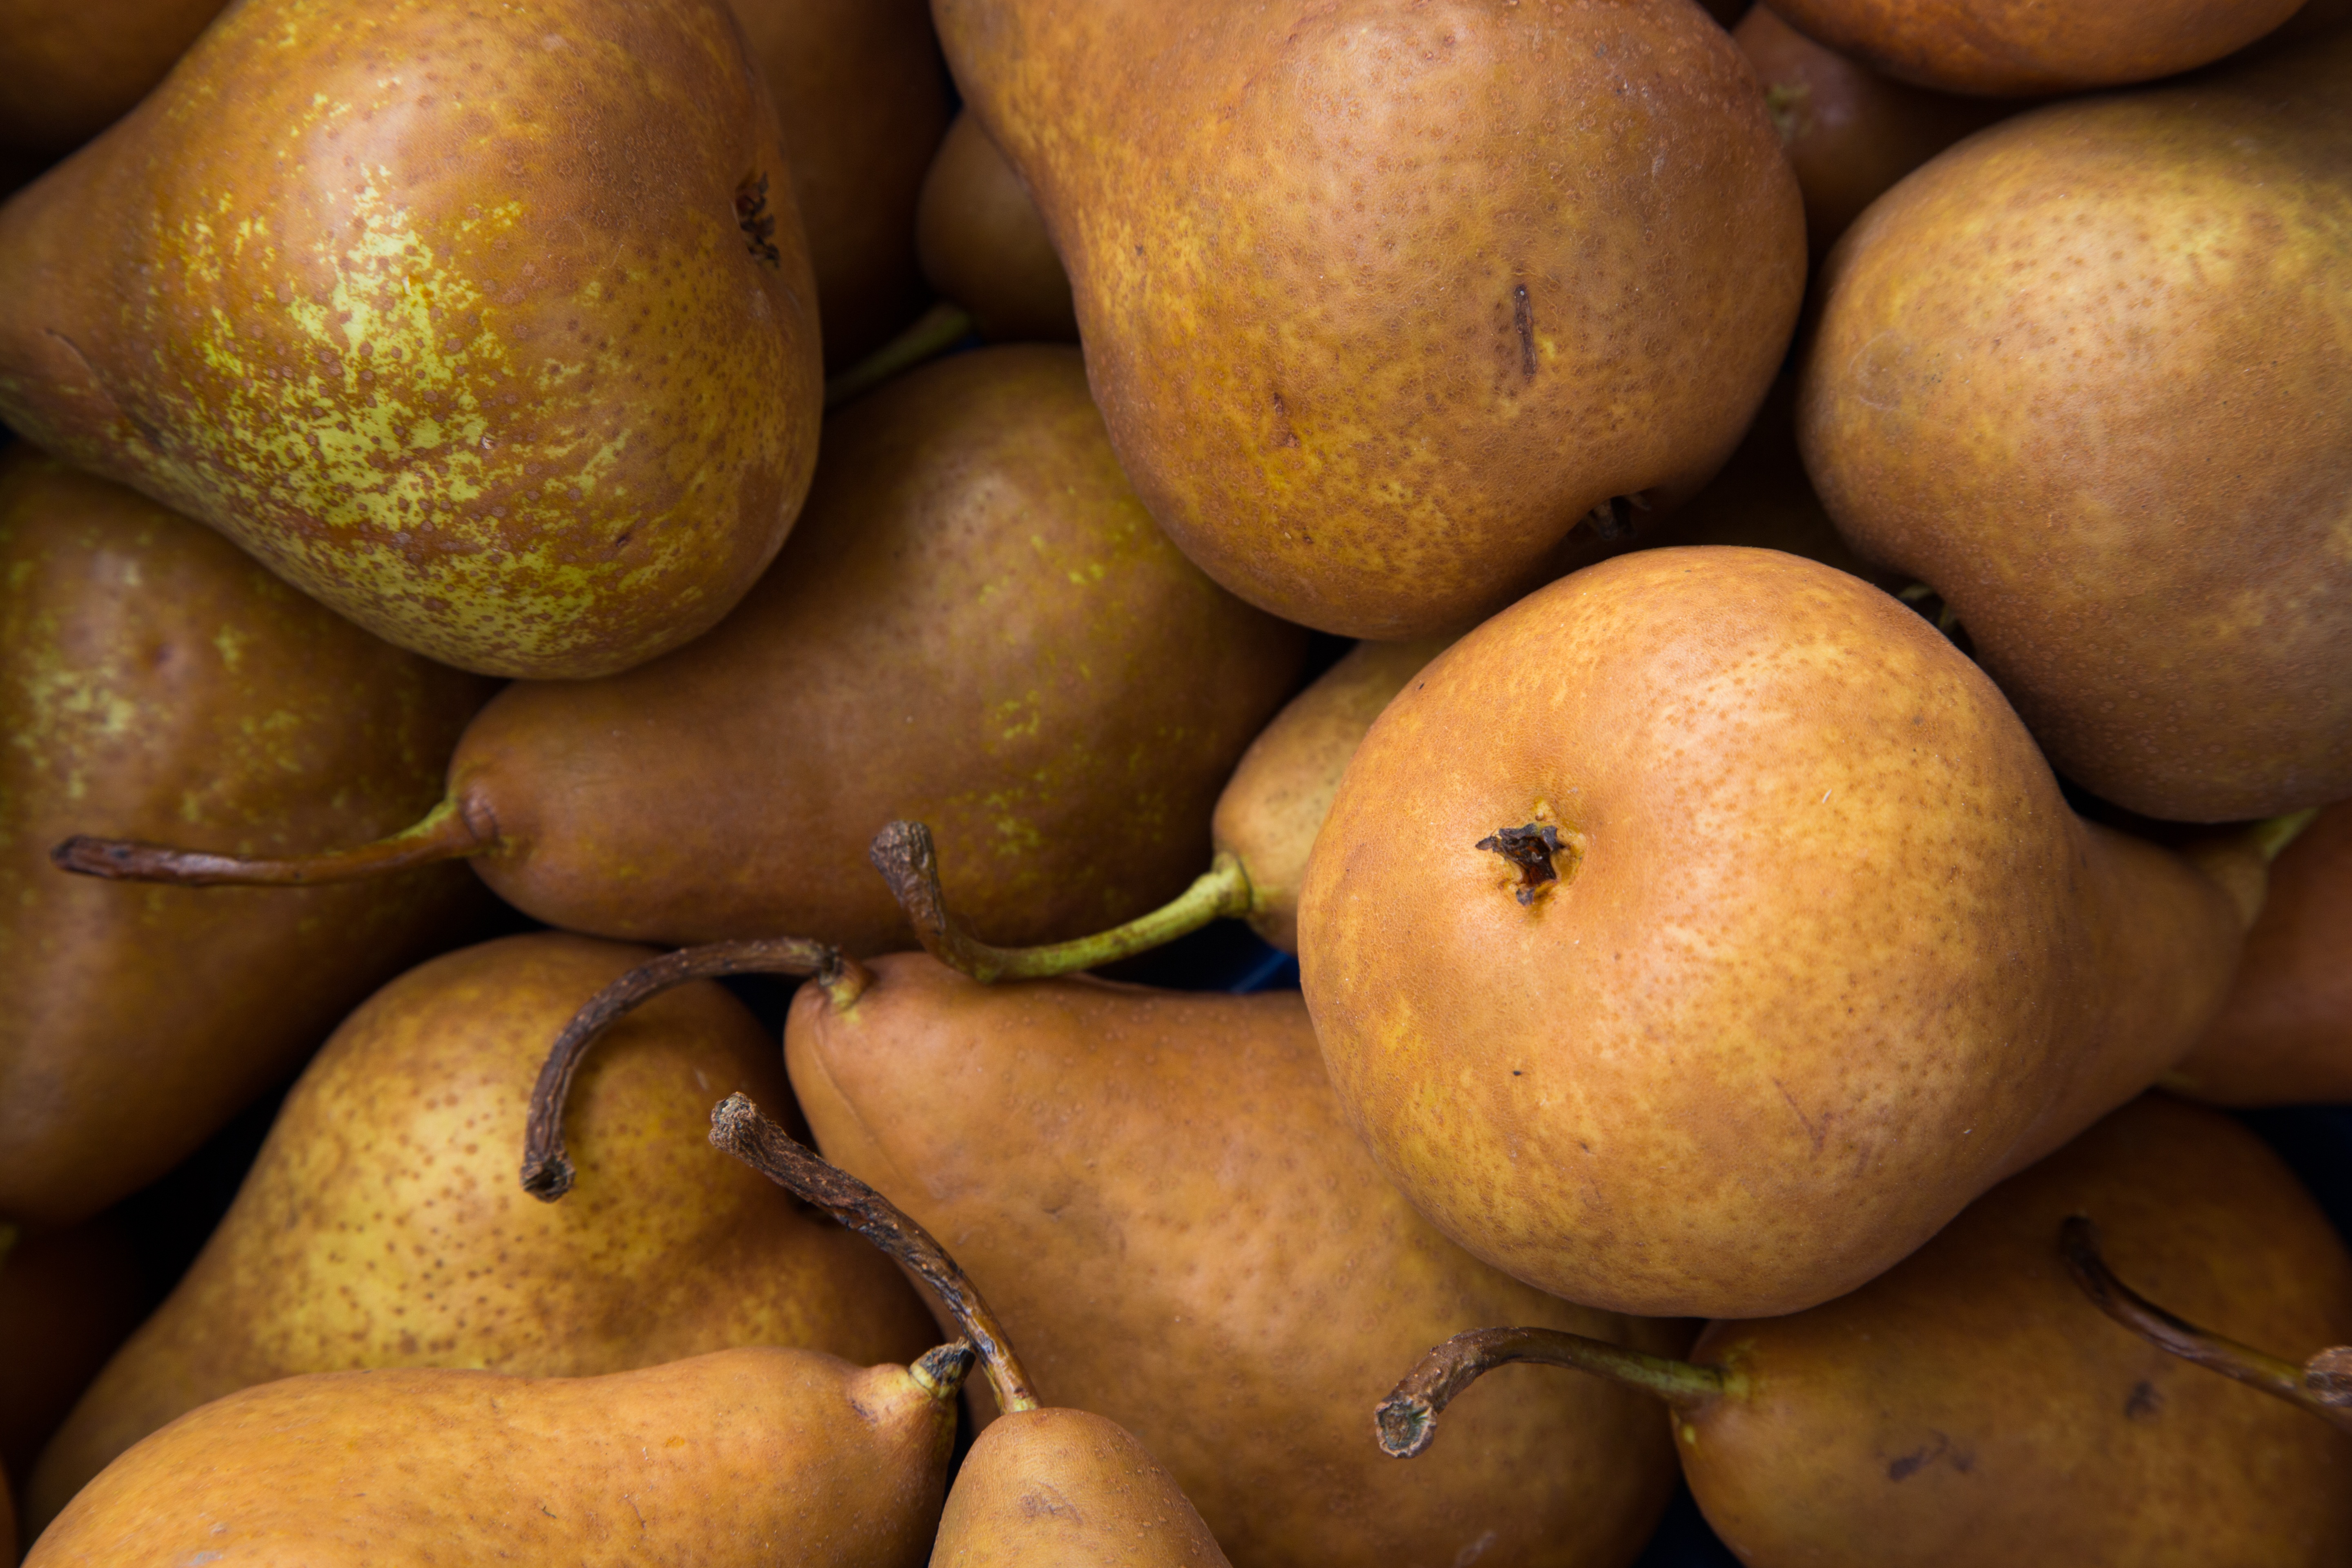 collection of best Pears HD wallpaper